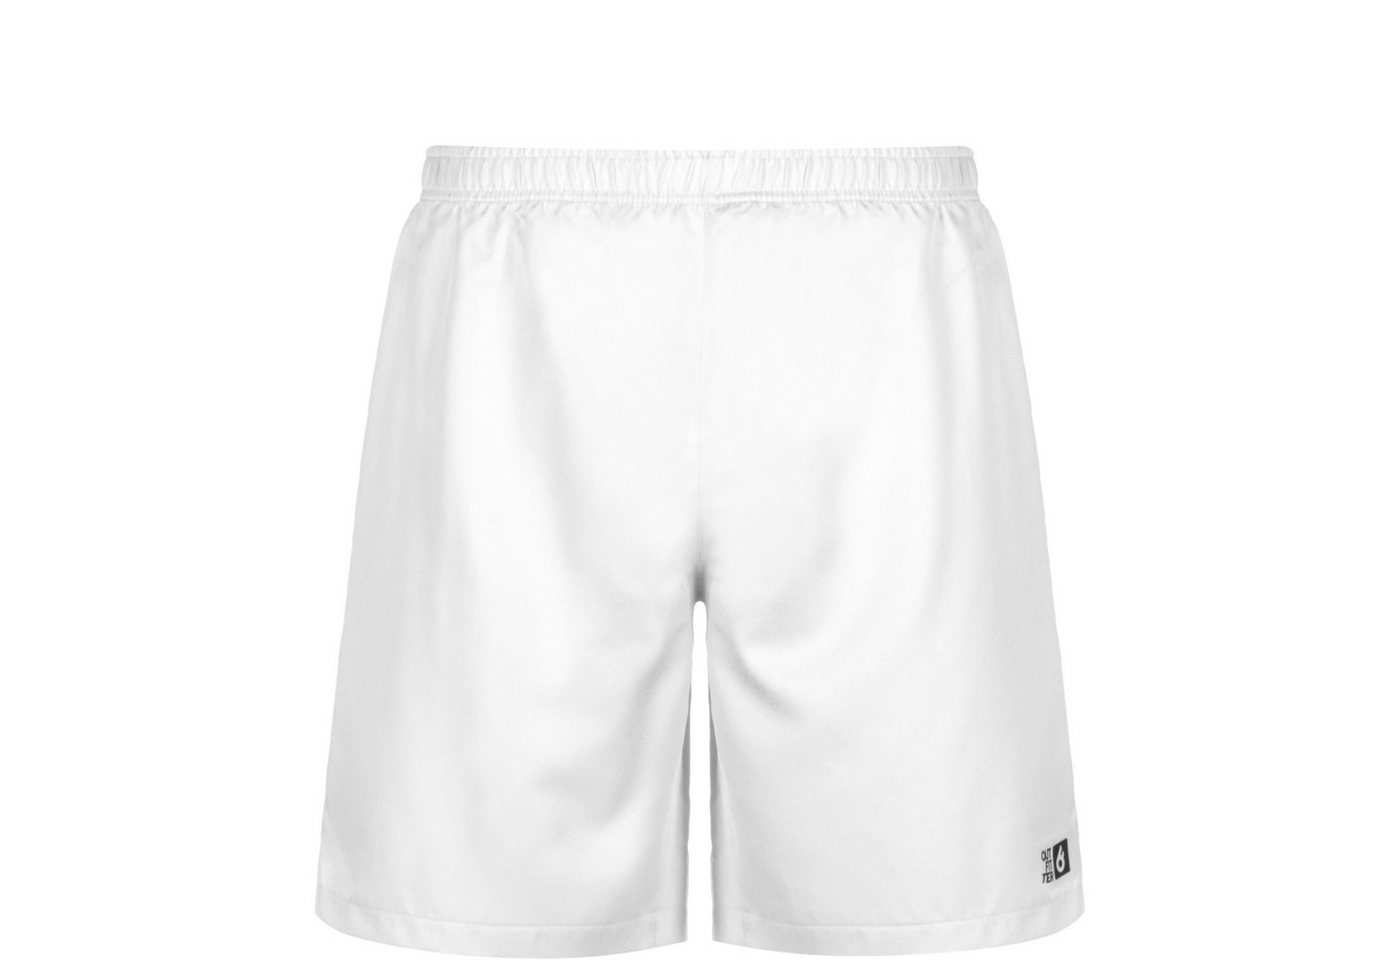 Outfitter Trainingsshorts OCEAN FABRICS TAHI Match Shorts Kinder von Outfitter